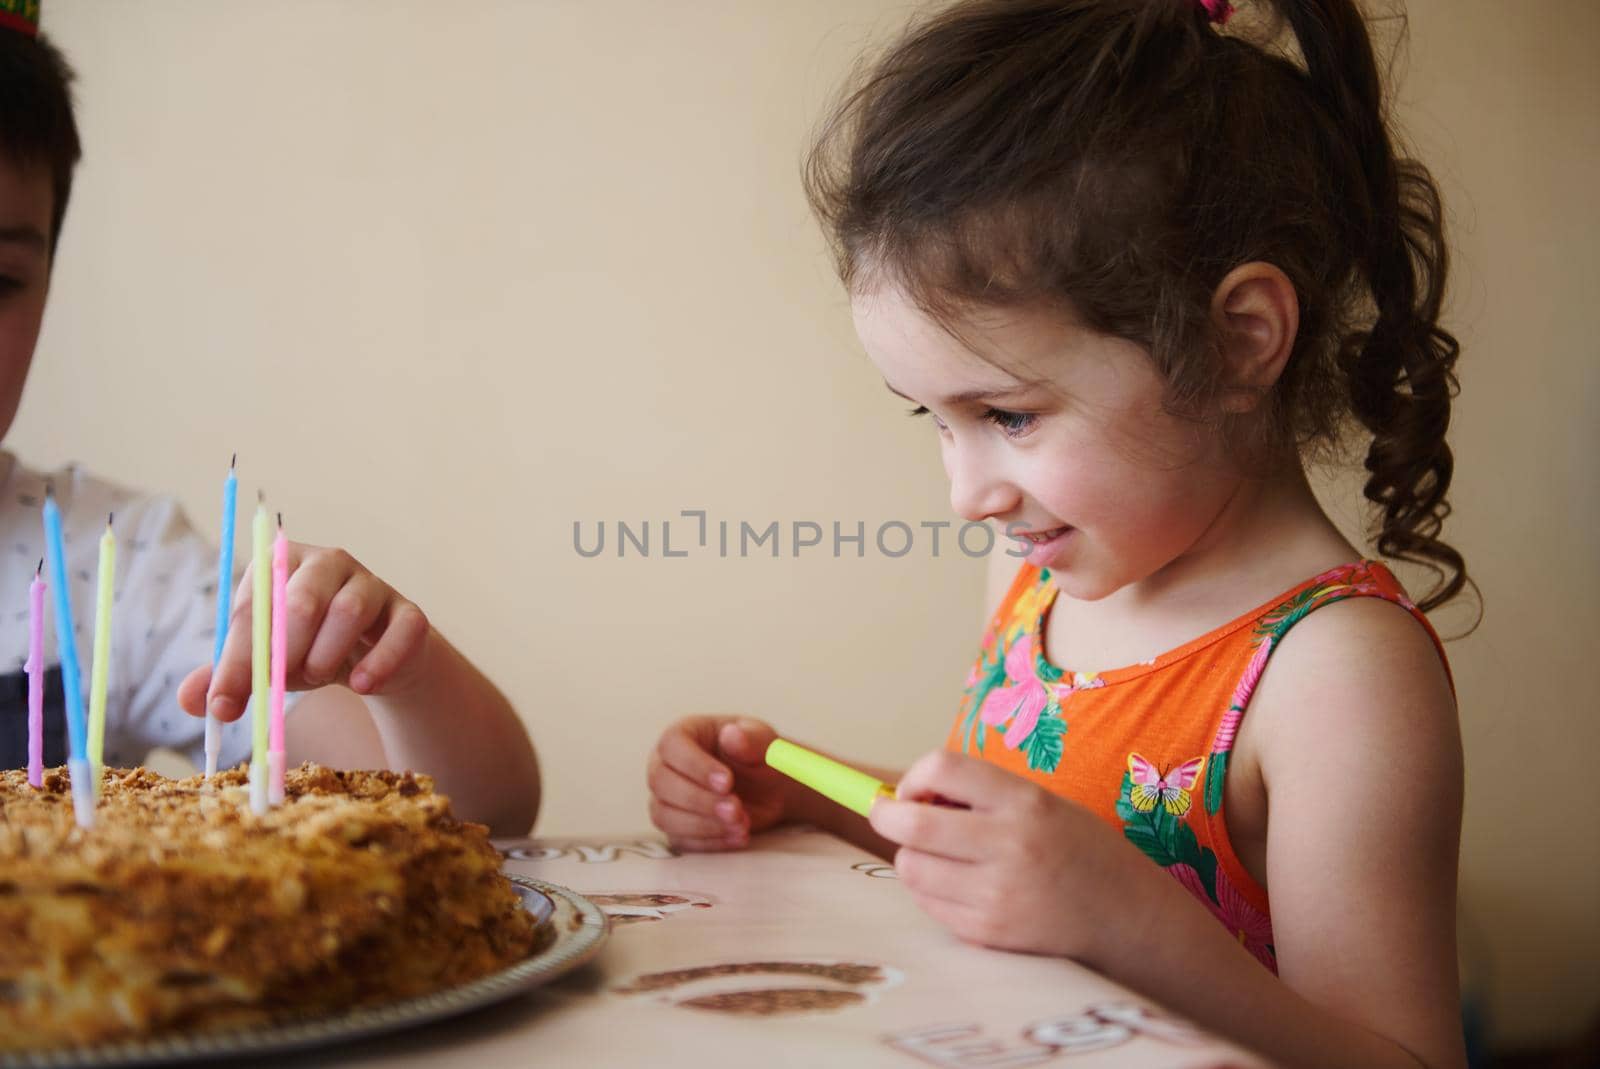 Close up portrait of a happy smiling adorable child, 5 year old Caucasian girl standing at the table with a birthday cake. Celebration, anniversary event concept